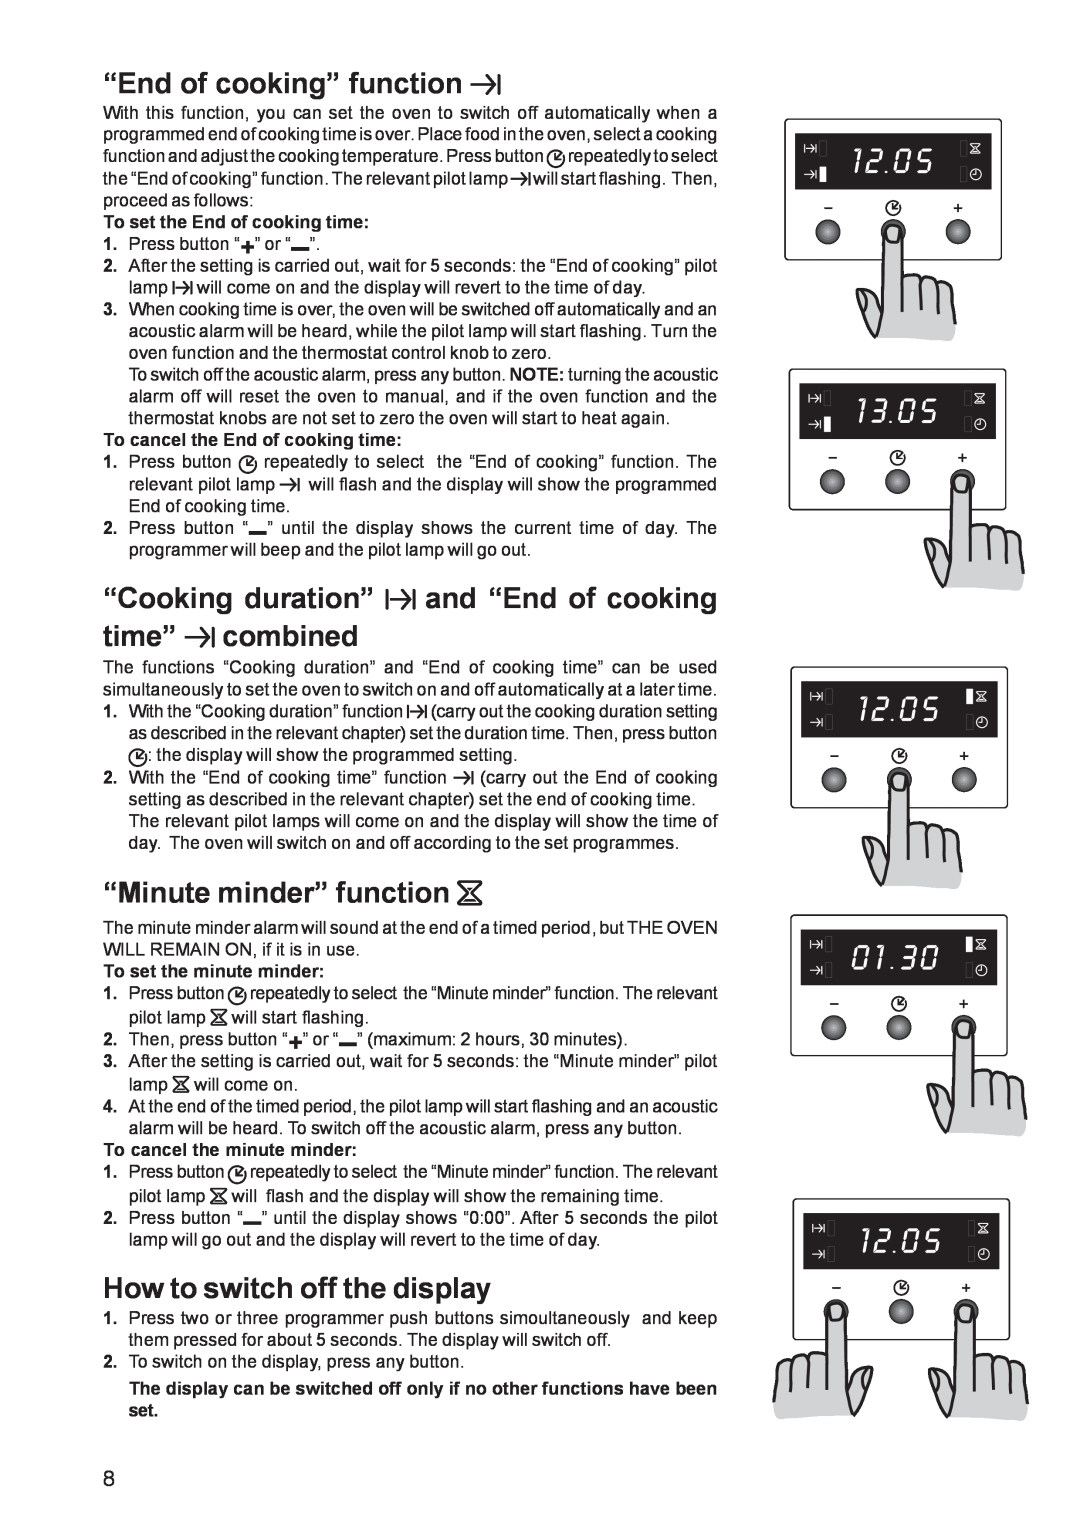 Zanussi ZBF 360 “End of cooking” function, “Cooking duration” and “End of cooking time” combined, “Minute minder” function 